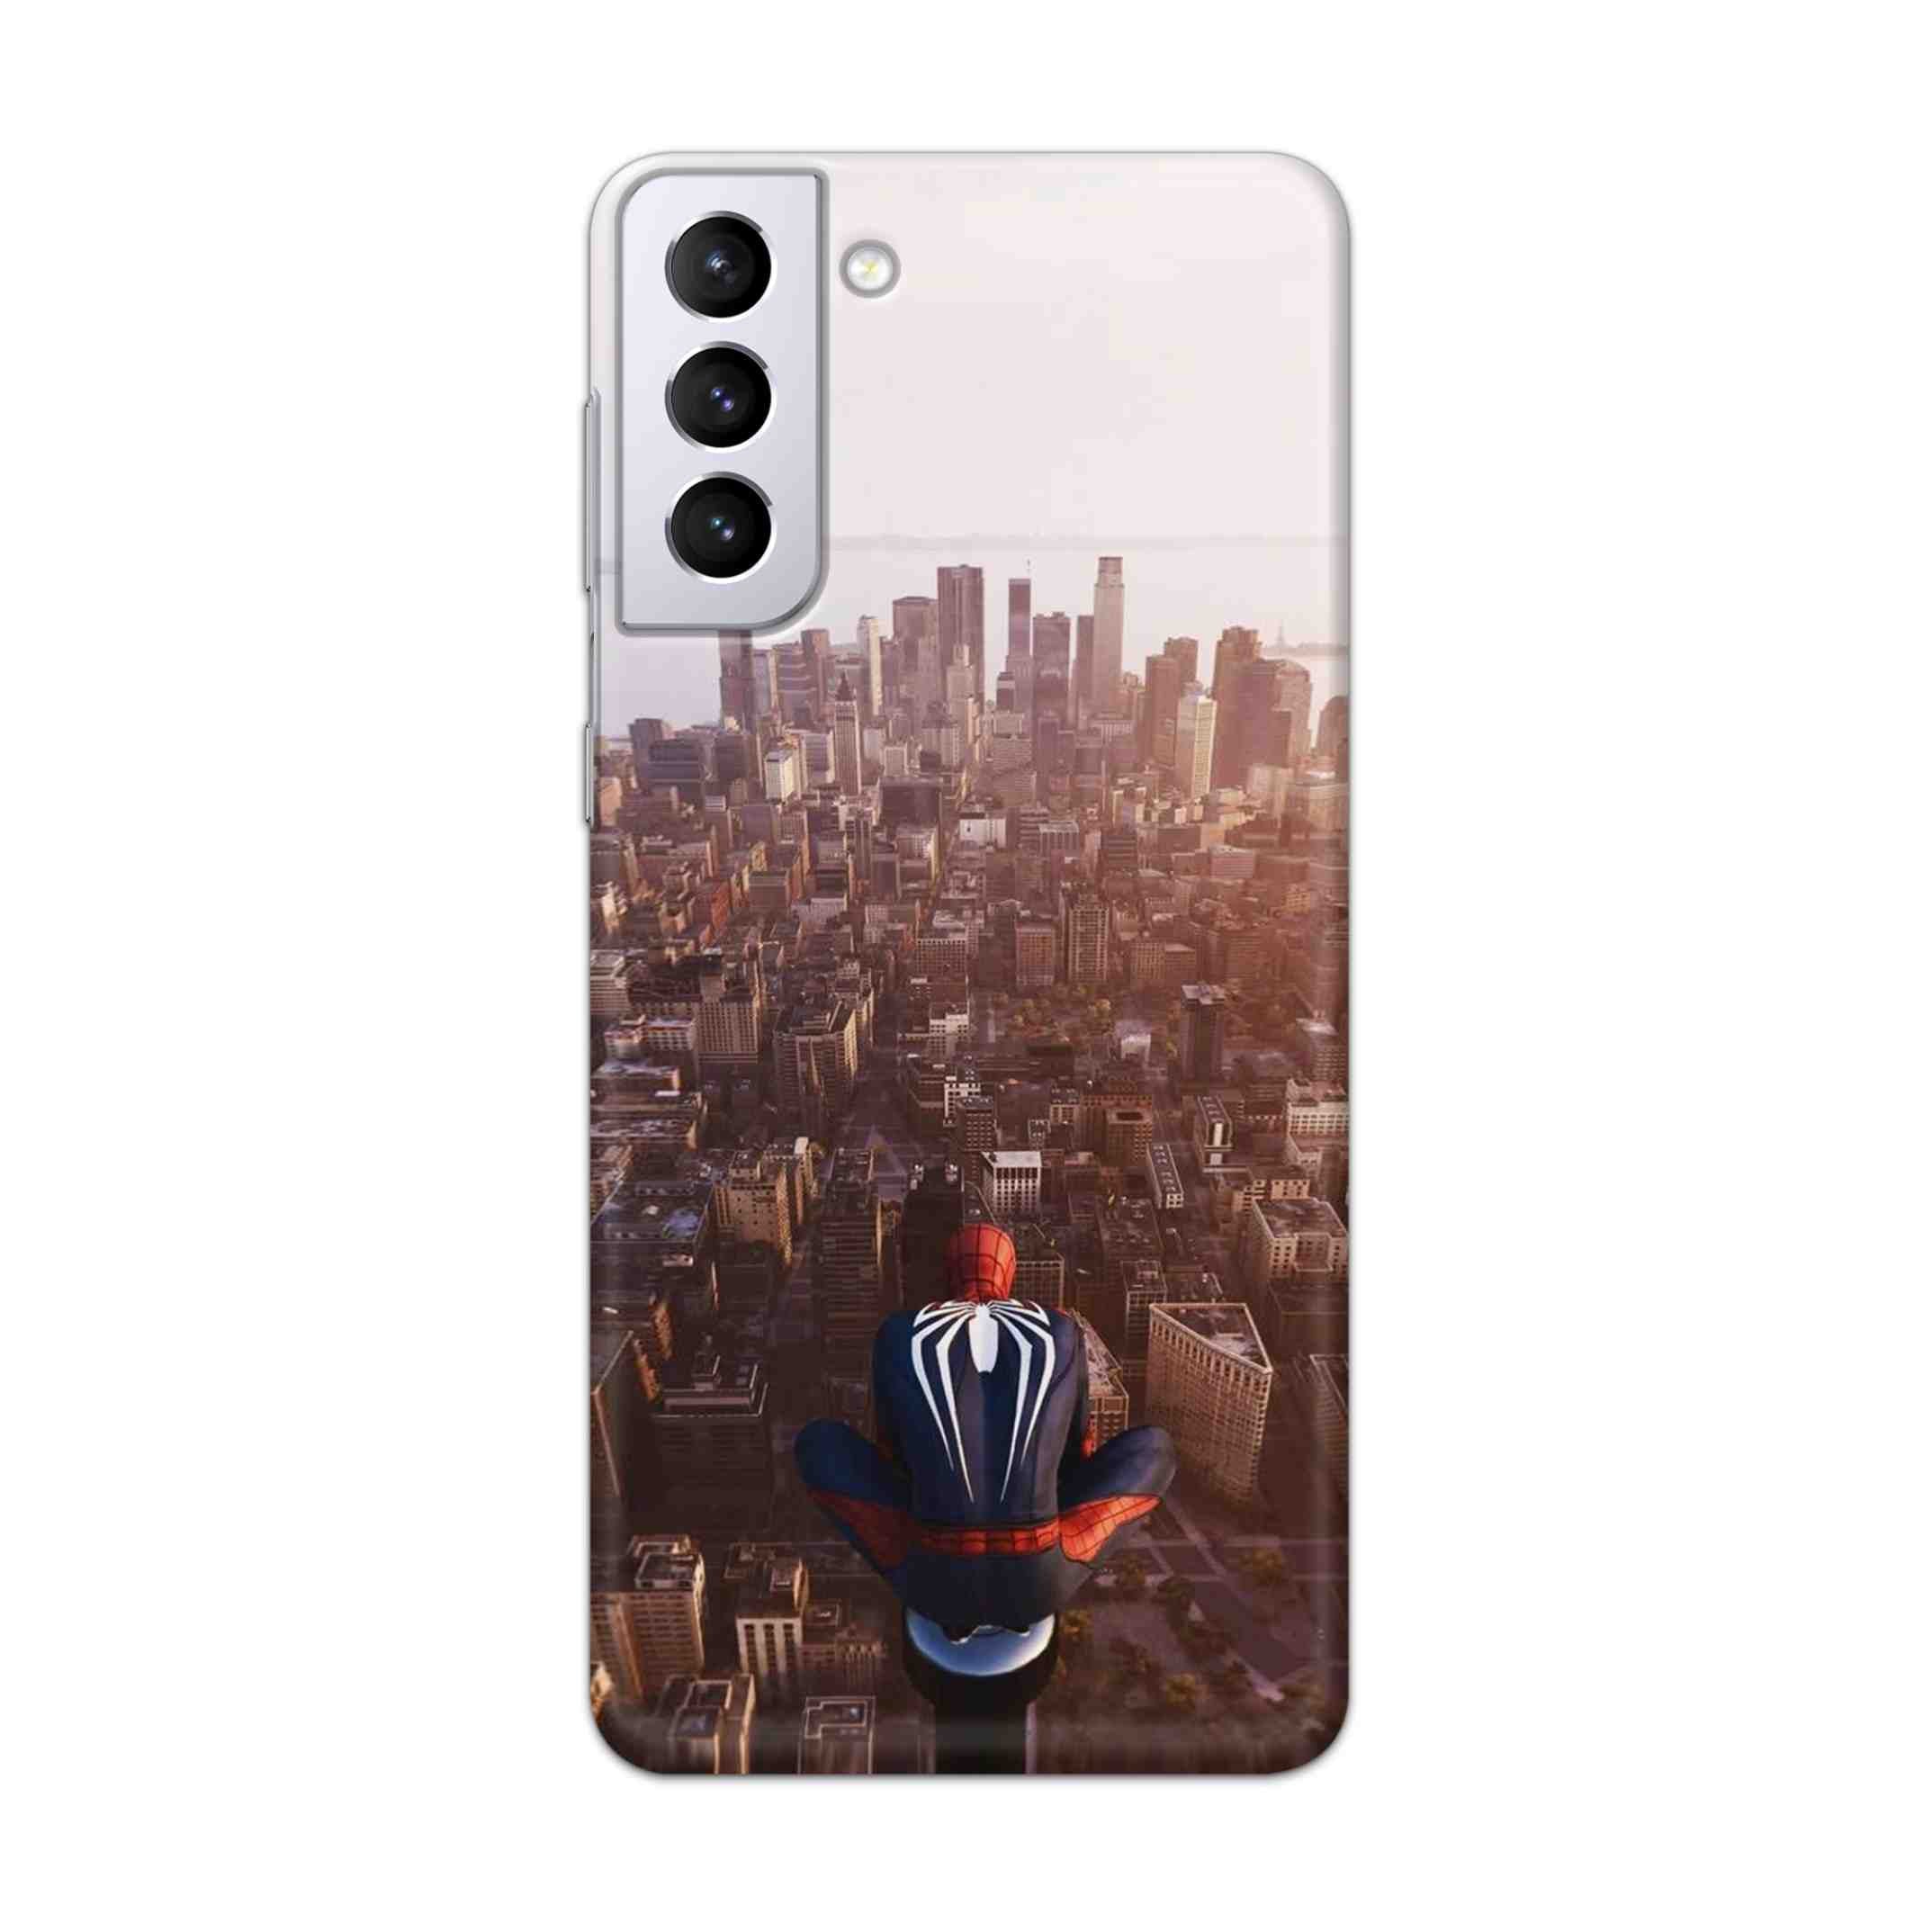 Buy City Of Spiderman Hard Back Mobile Phone Case Cover For Samsung Galaxy S21 Online